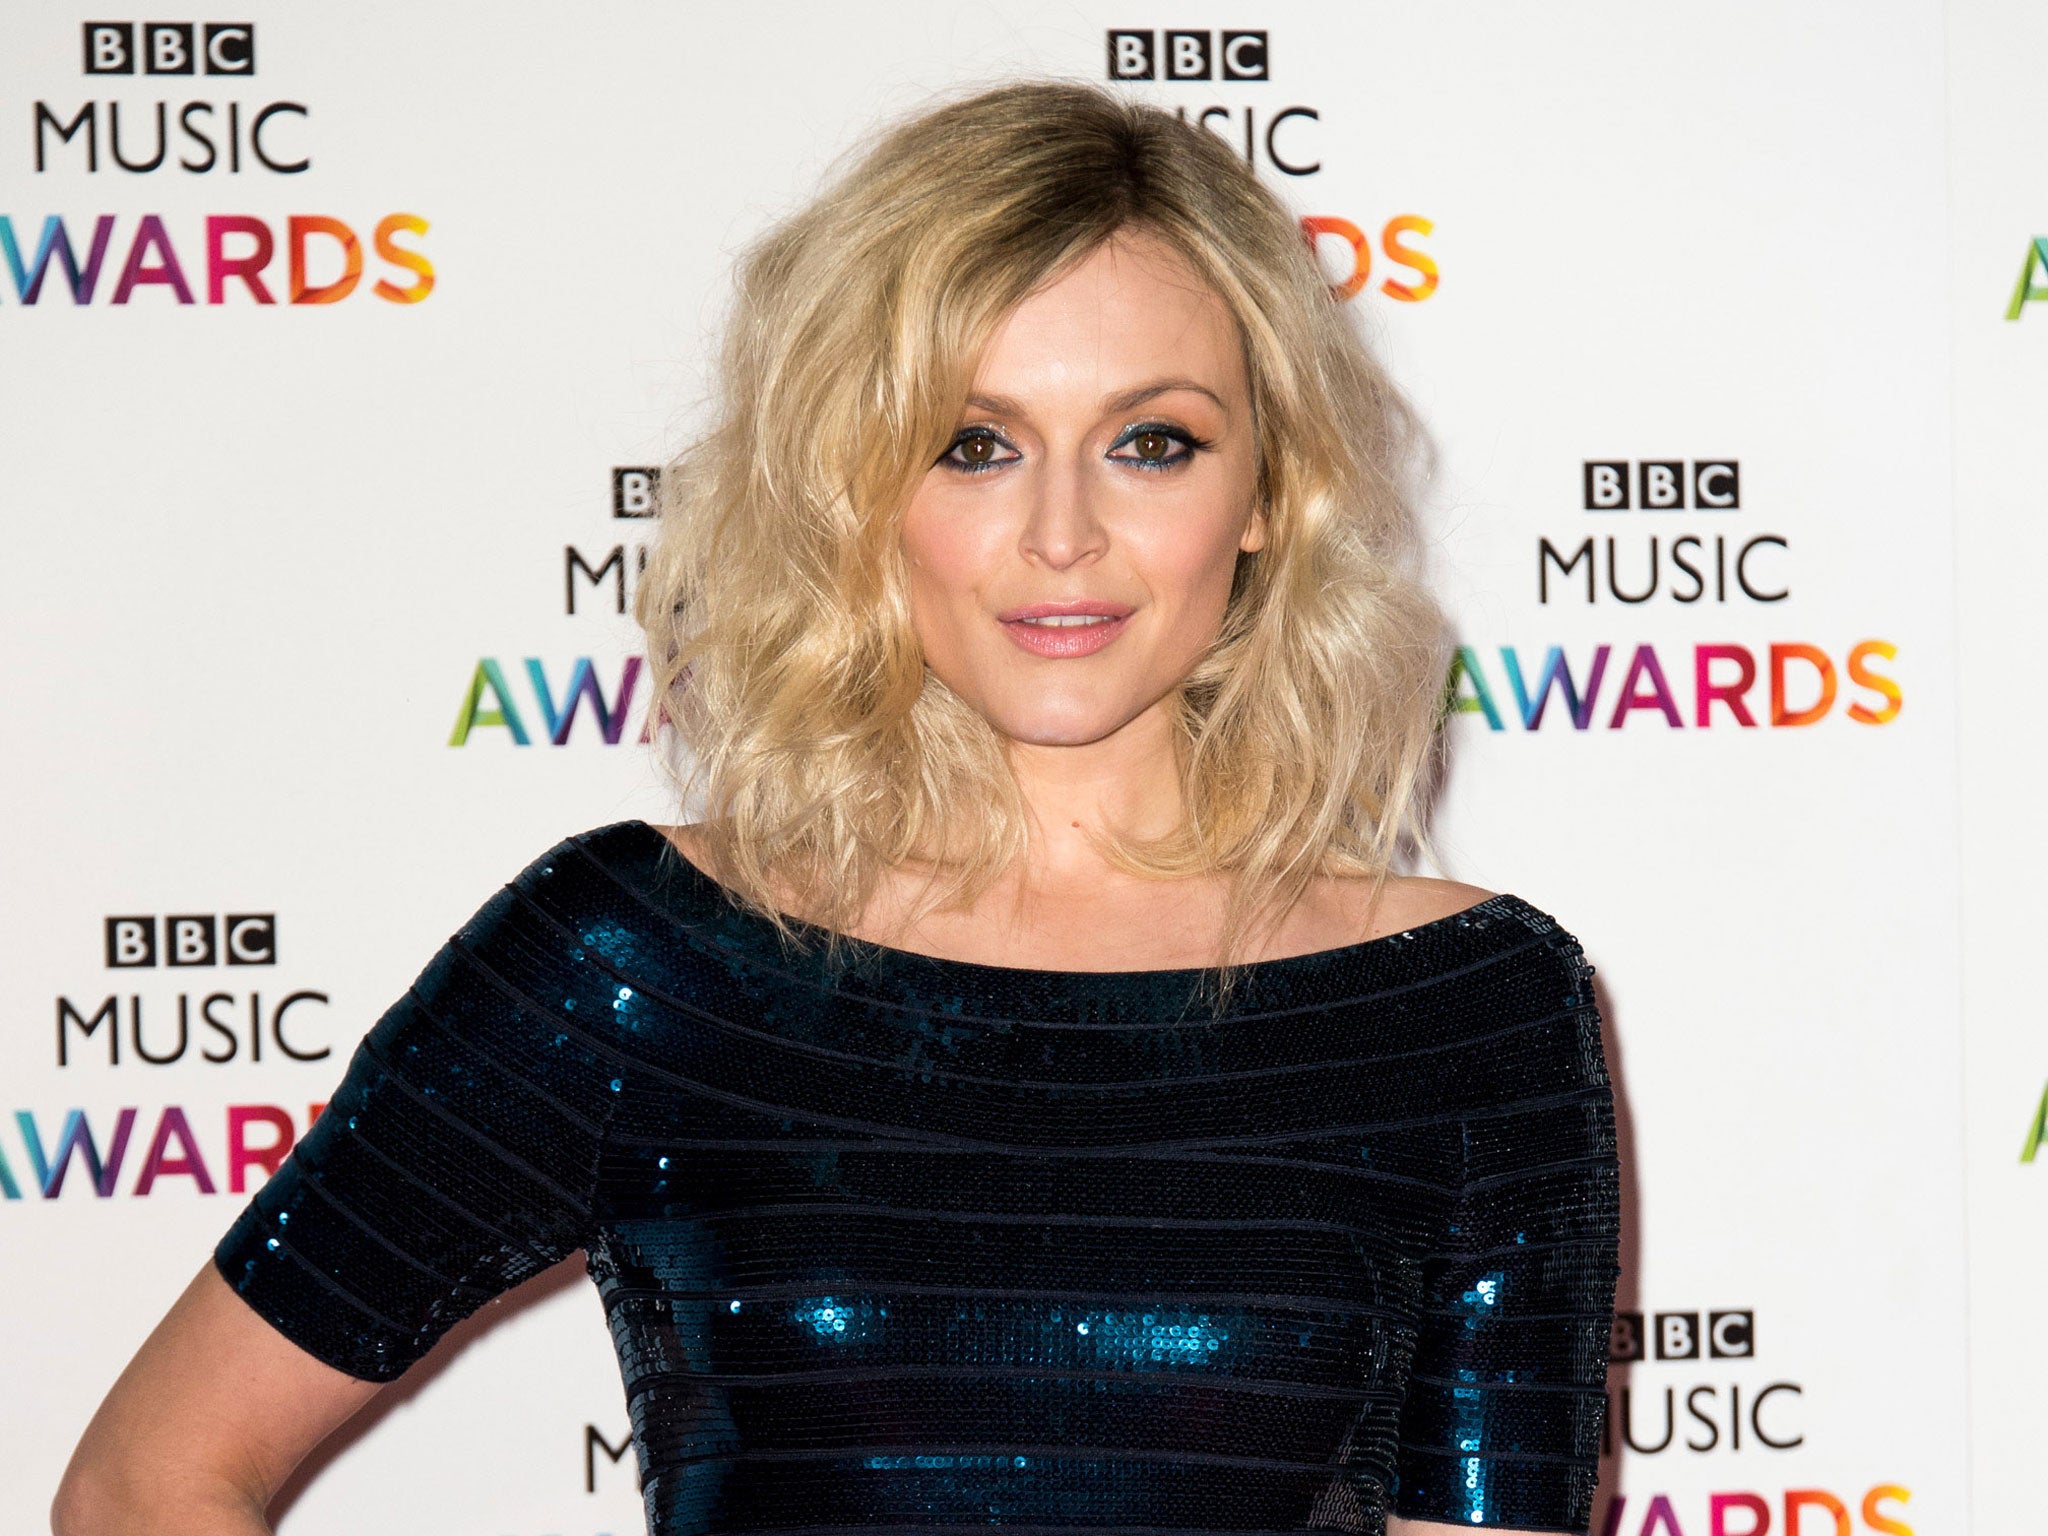 The new-look Top of the Pops could see Fearne Cotton returns as a host alongside Dermot O'Leary